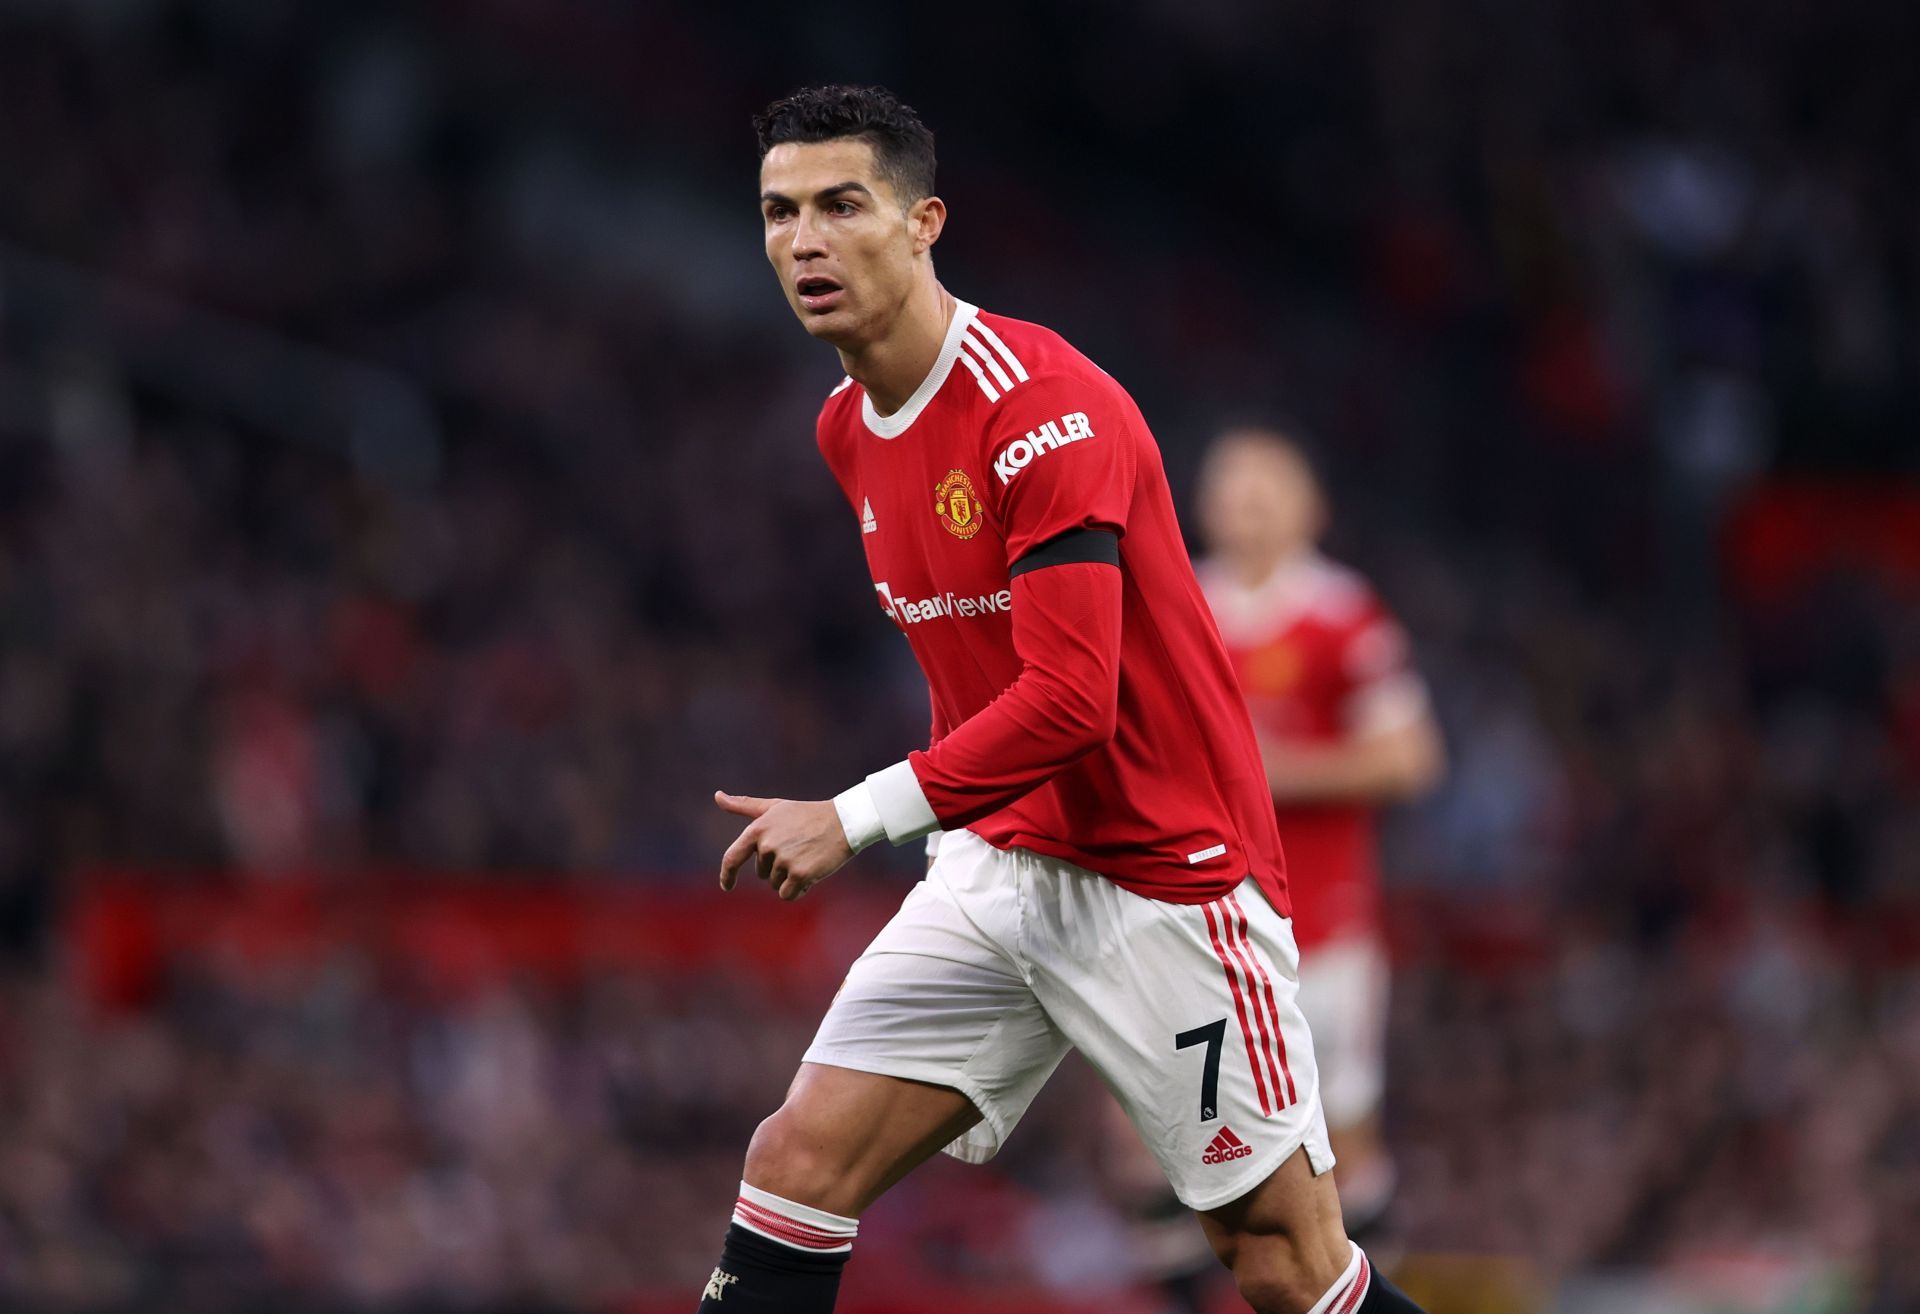 Not the return many had envisioned for Cristiano Ronaldo at Old Trafford